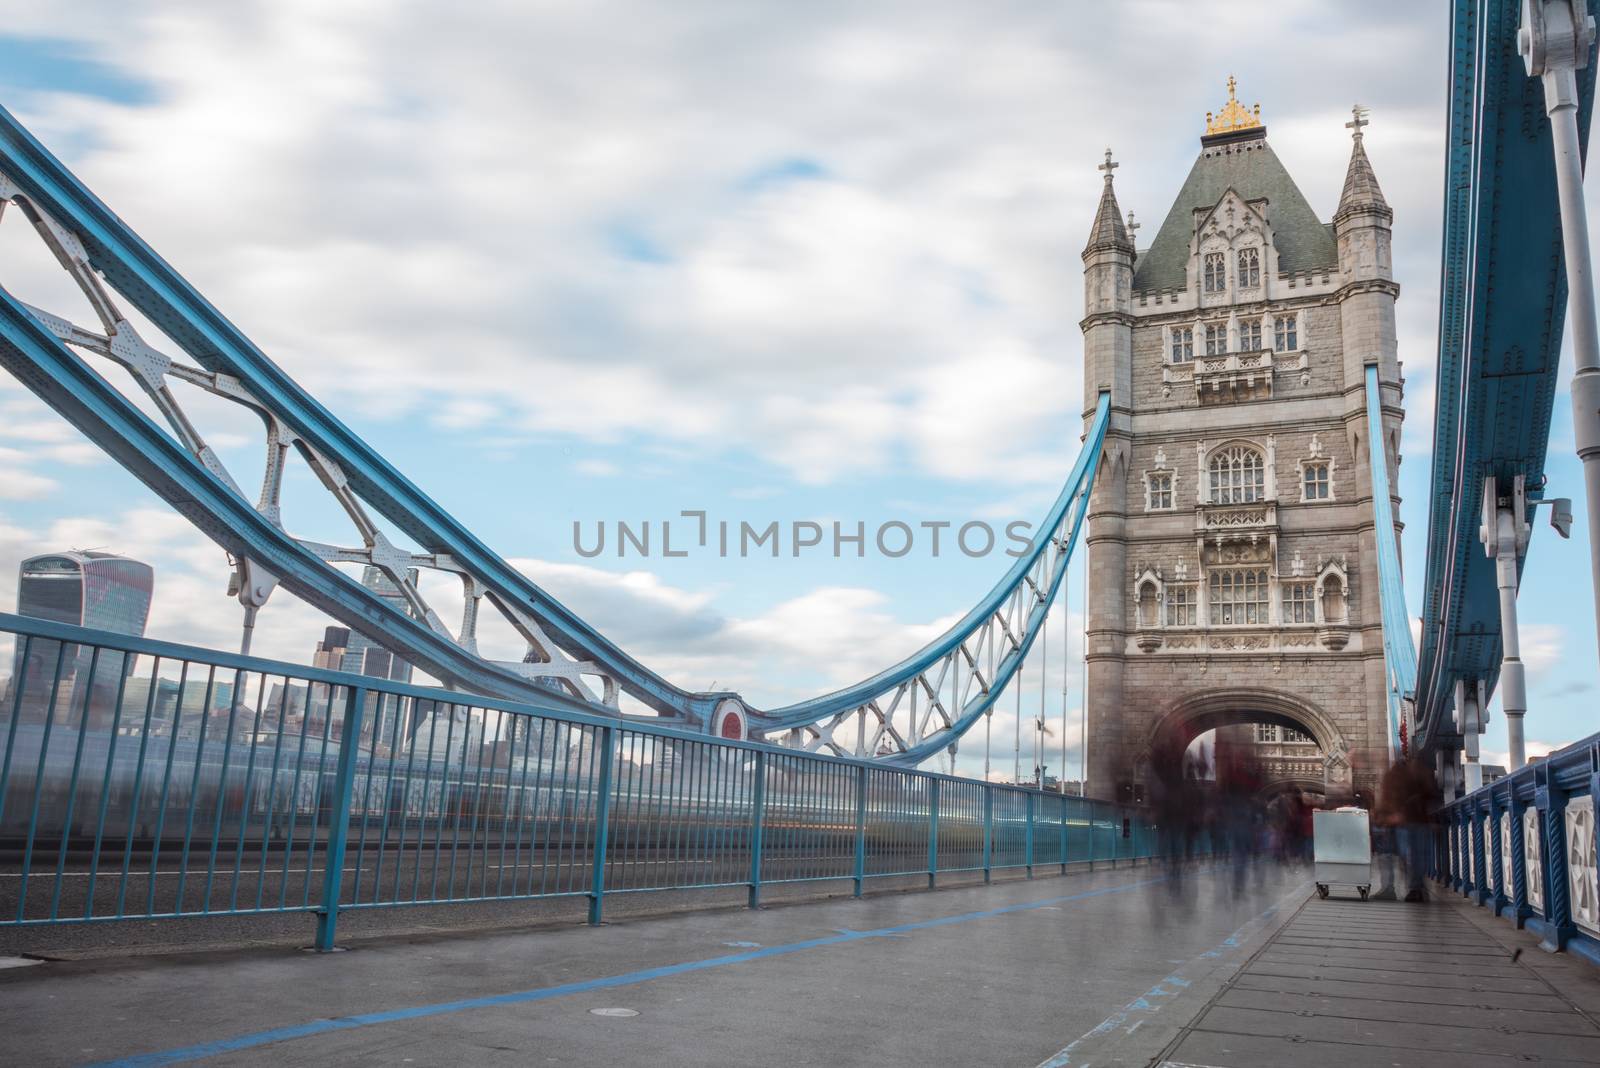 Long exposure of pedestrians crossing Tower Bridge. People have been blurred to a ghostly shape.